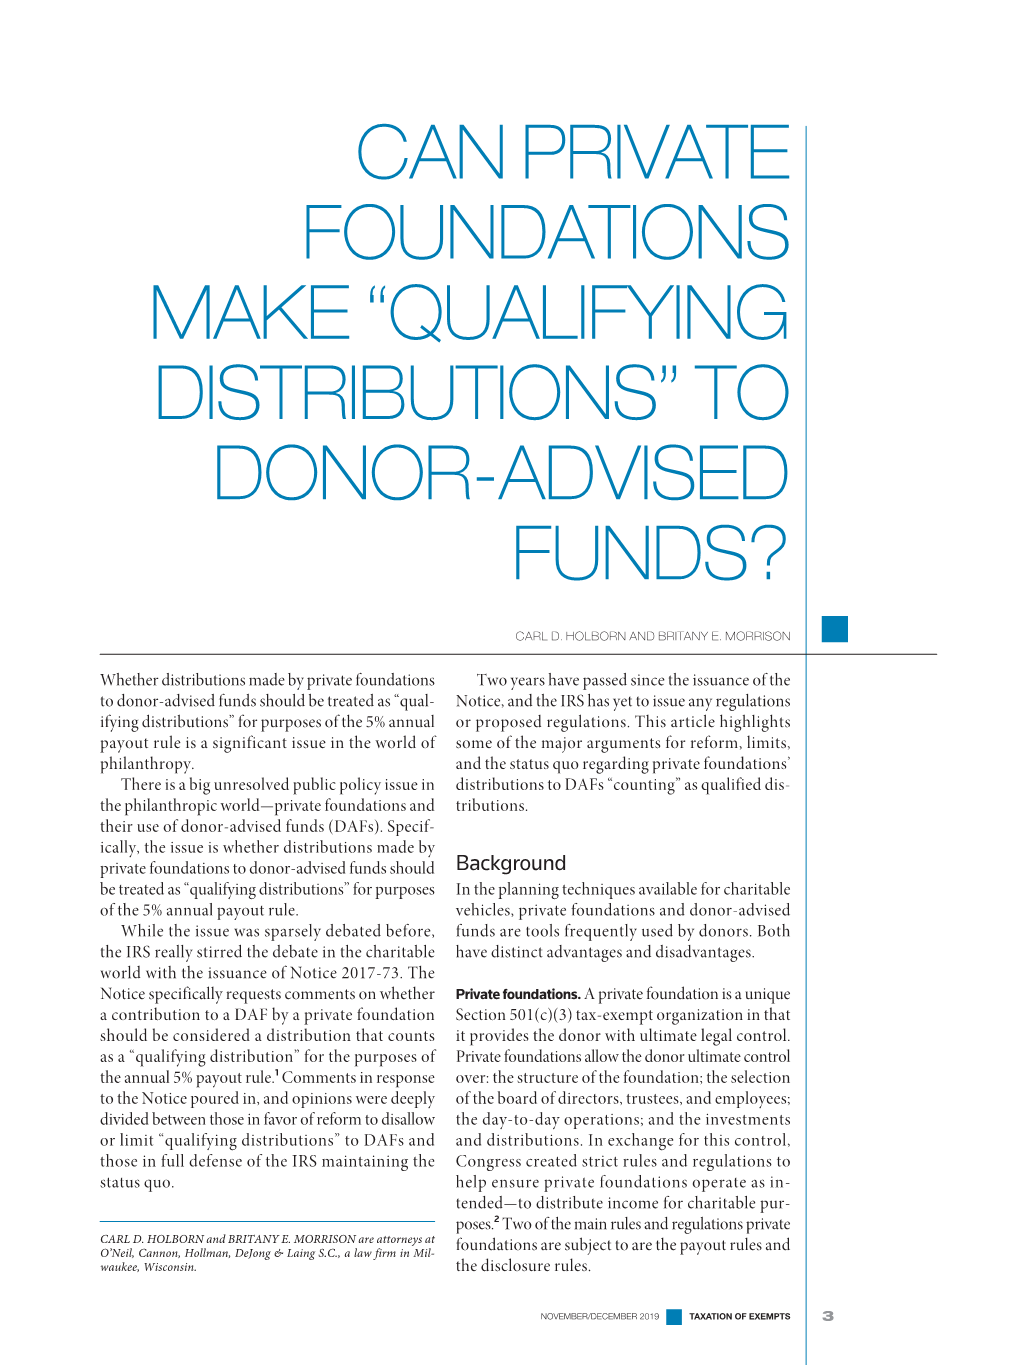 “Qualifying Distributions” to Donor-Advised Funds?